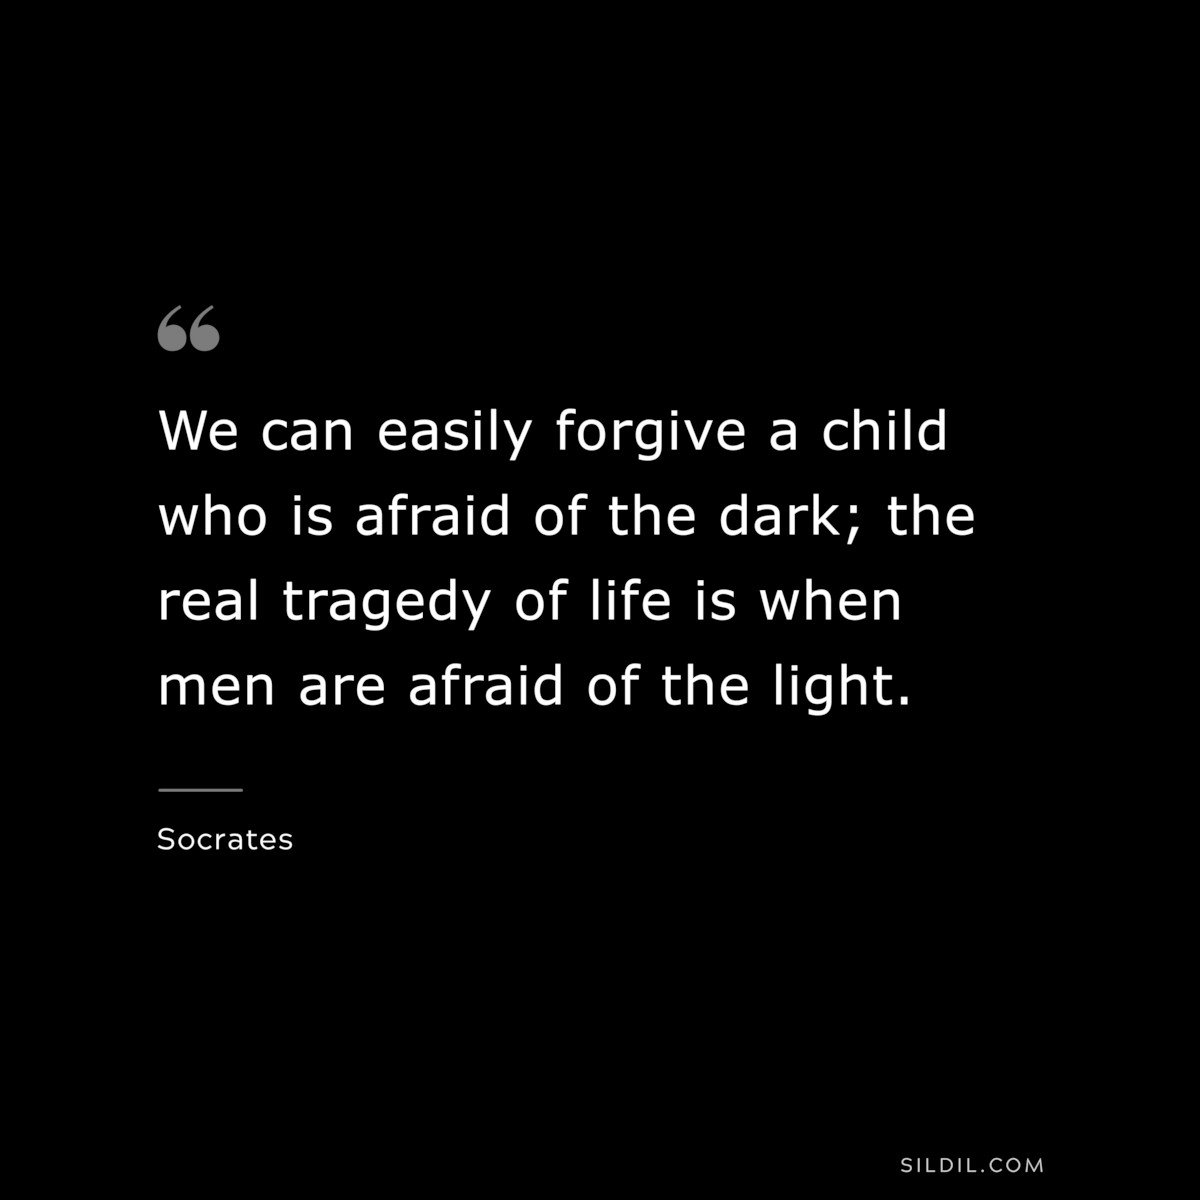 We can easily forgive a child who is afraid of the dark; the real tragedy of life is when men are afraid of the light. ― Socrates